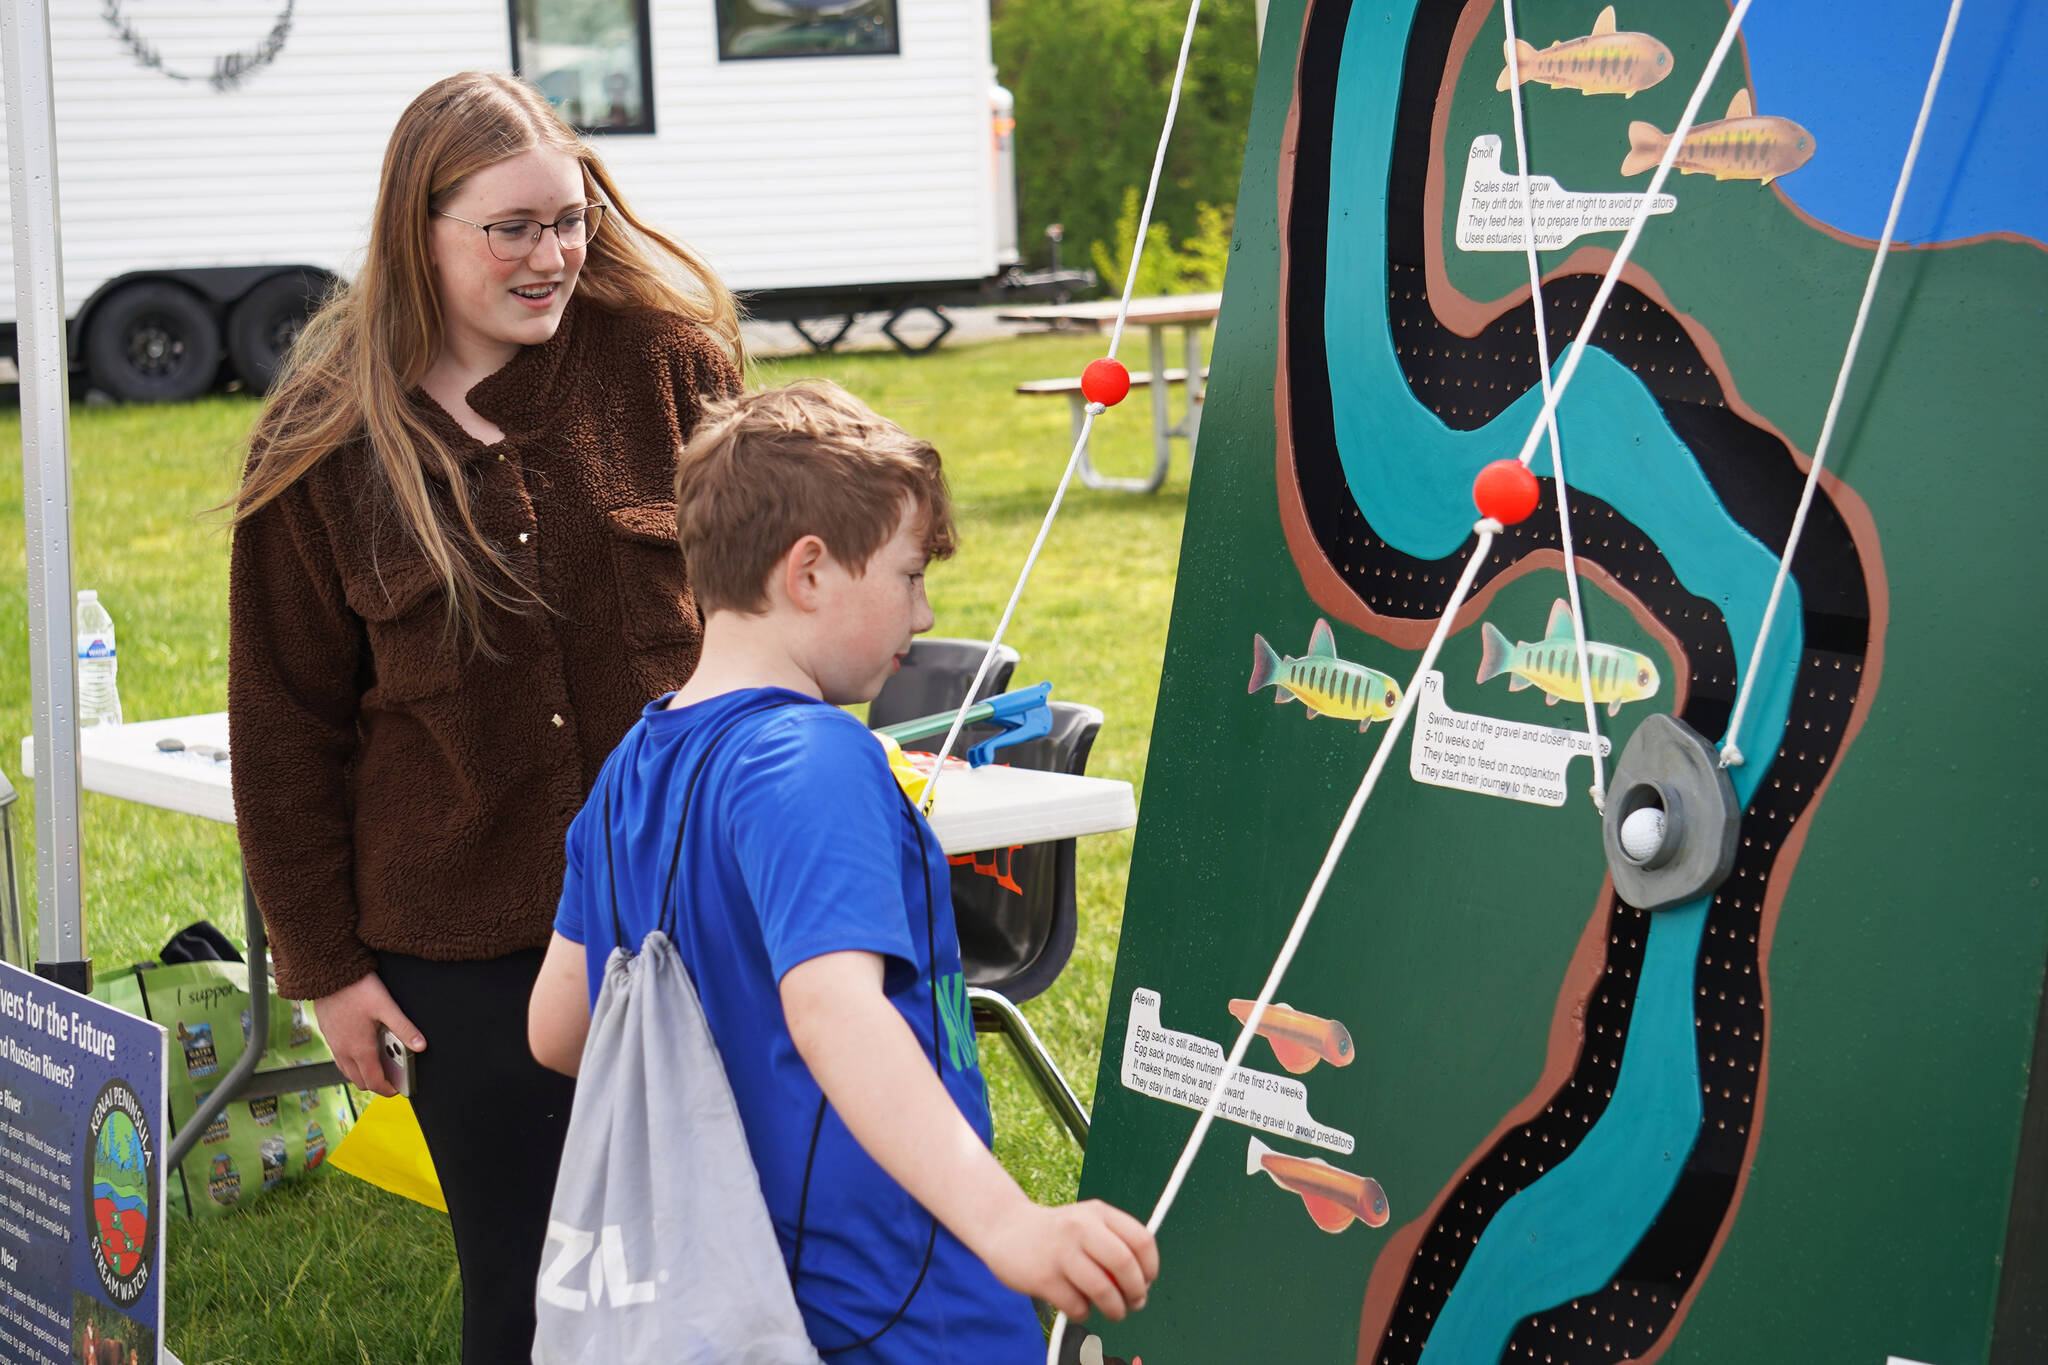 Emerson Kapp, second-place winner of the 2023 Caring for the Kenai competition, shows participants how to use her project, the Kenai Peninsula Maze Board, during the Kenai River Festival on Friday, June 9, 2023, at Soldotna Creek Park in Soldotna, Alaska. (Jake Dye/Peninsula Clarion)